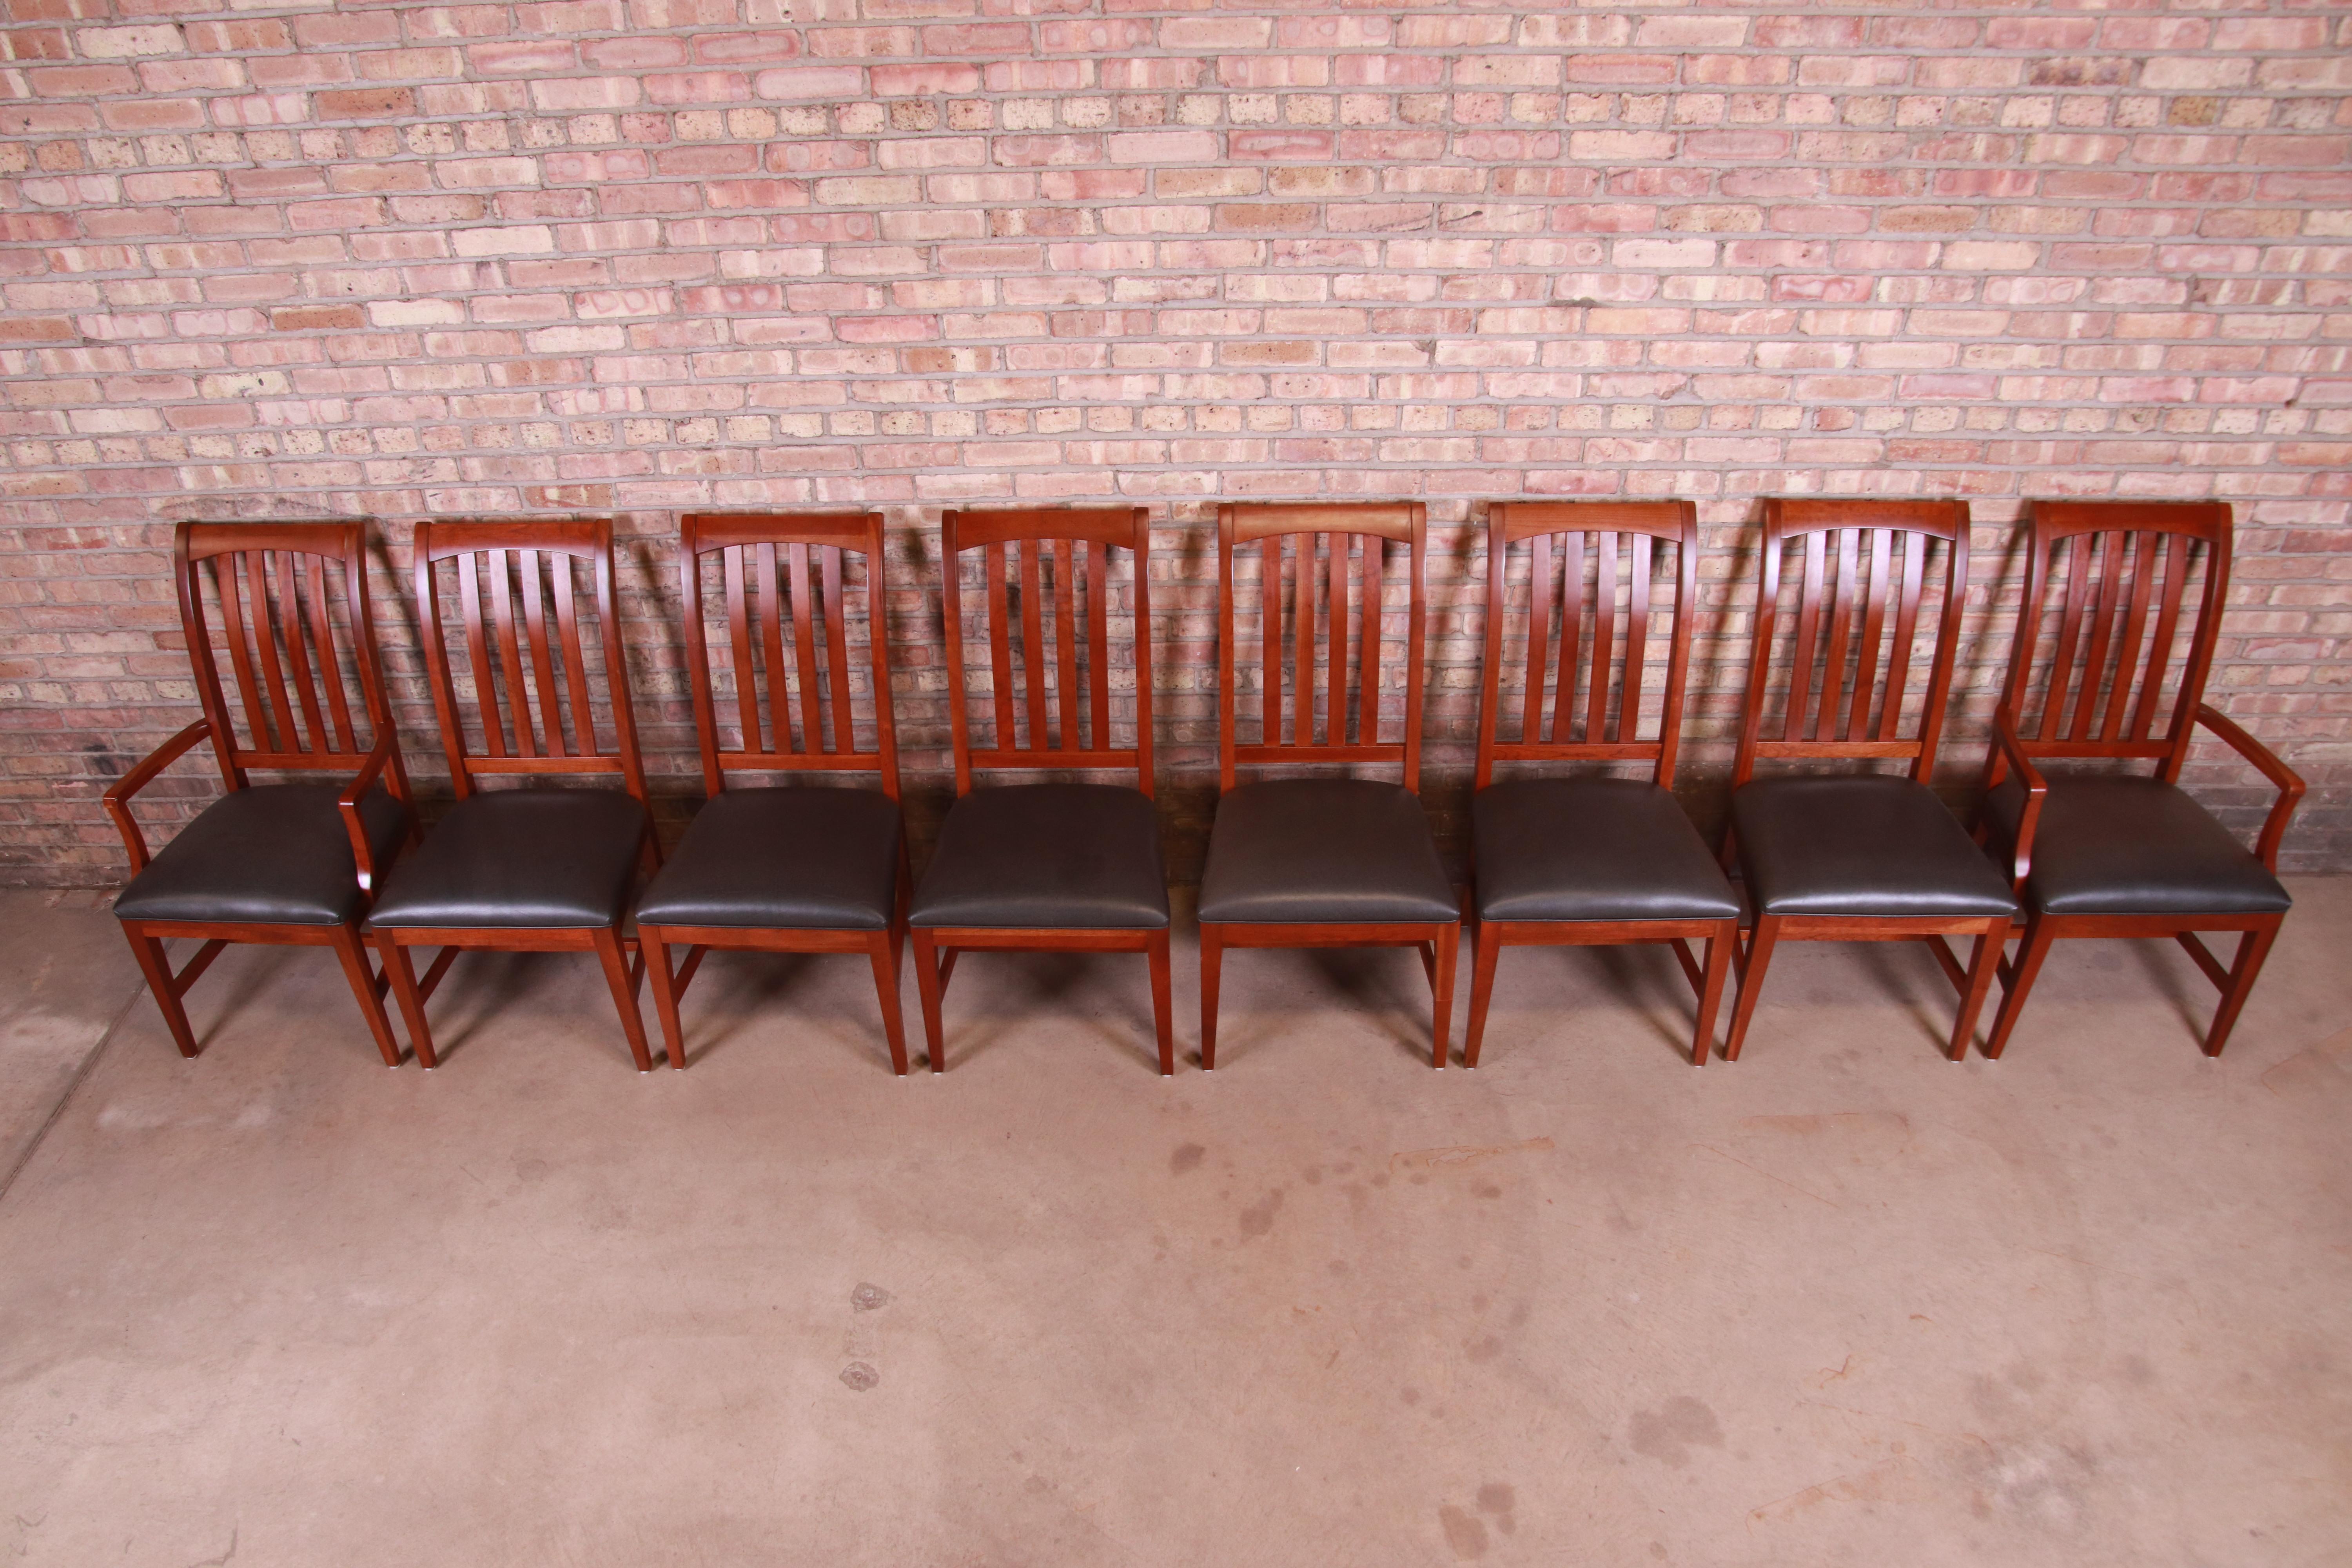 20th Century Ethan Allen Arts & Crafts Solid Cherry Wood Dining Chairs, Set of Eight